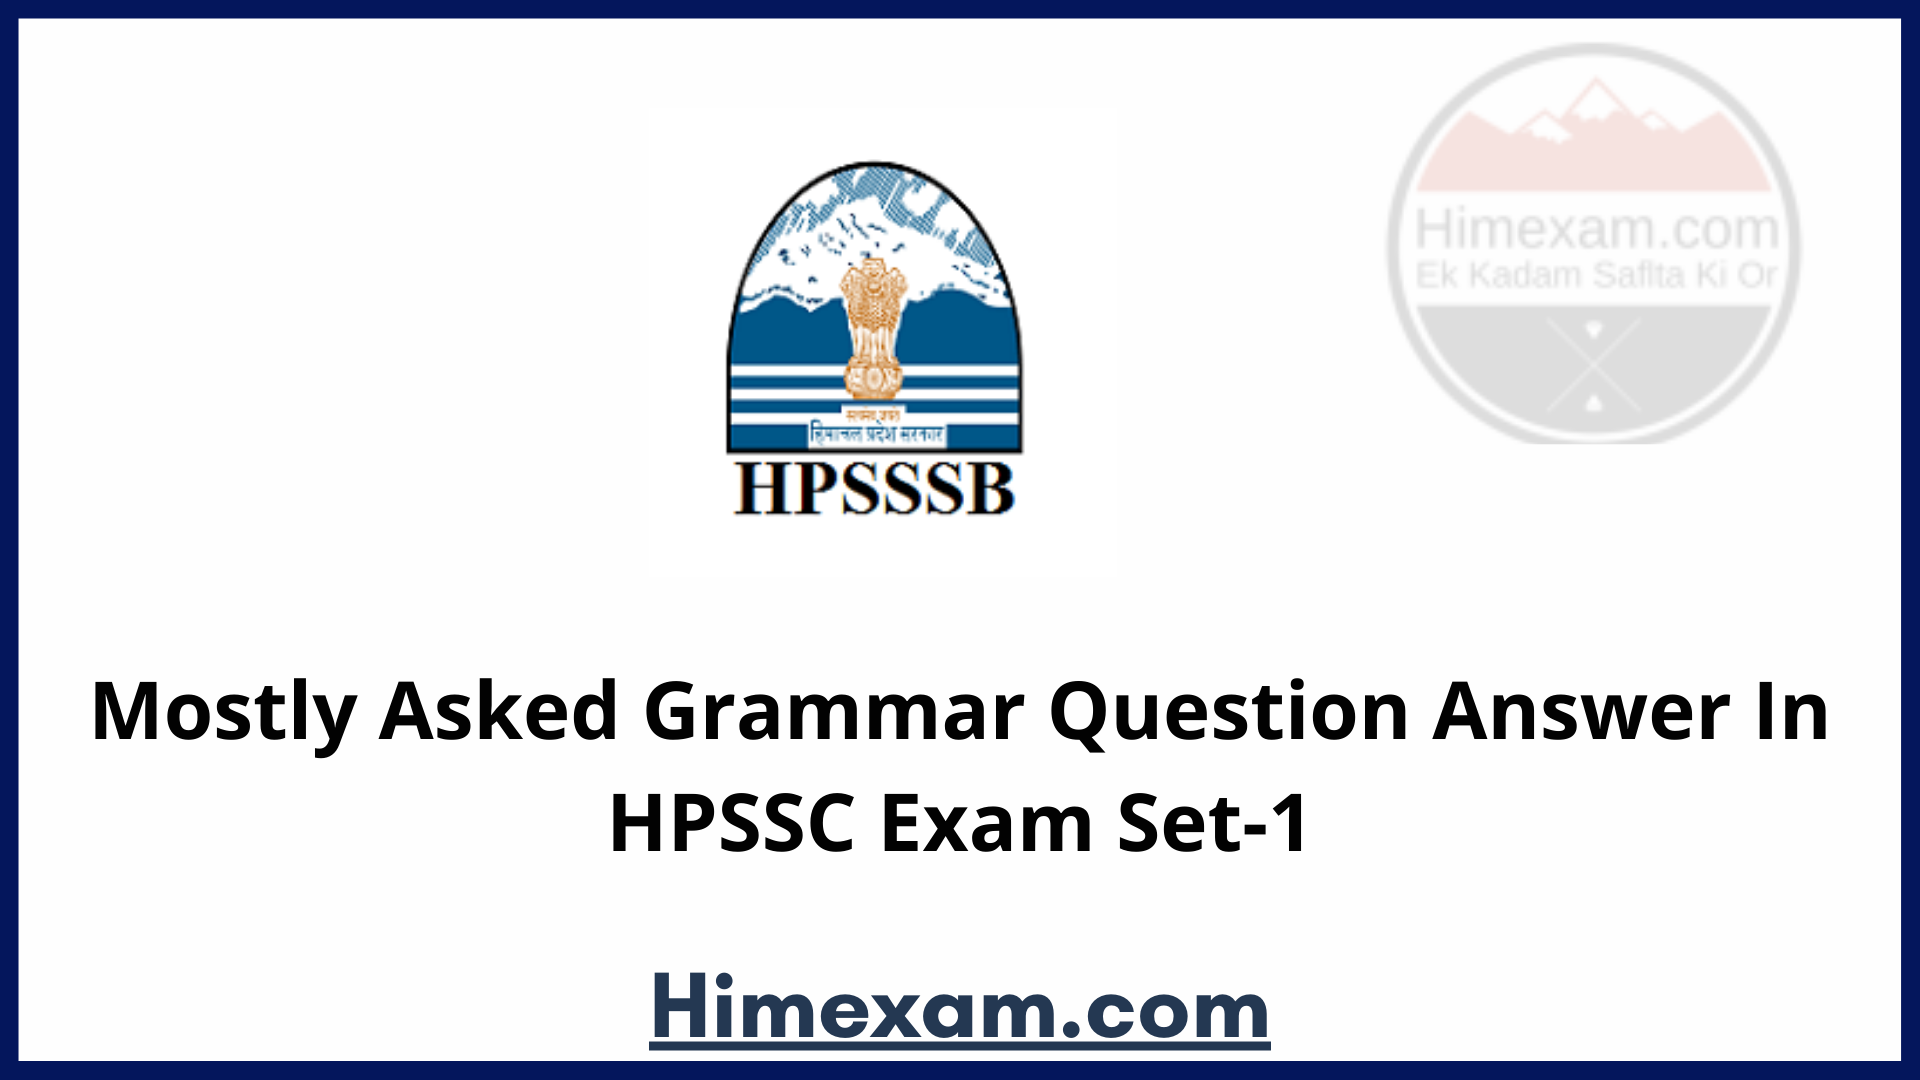 Mostly Asked Grammar Question Answer In HPSSC Exam Set-1